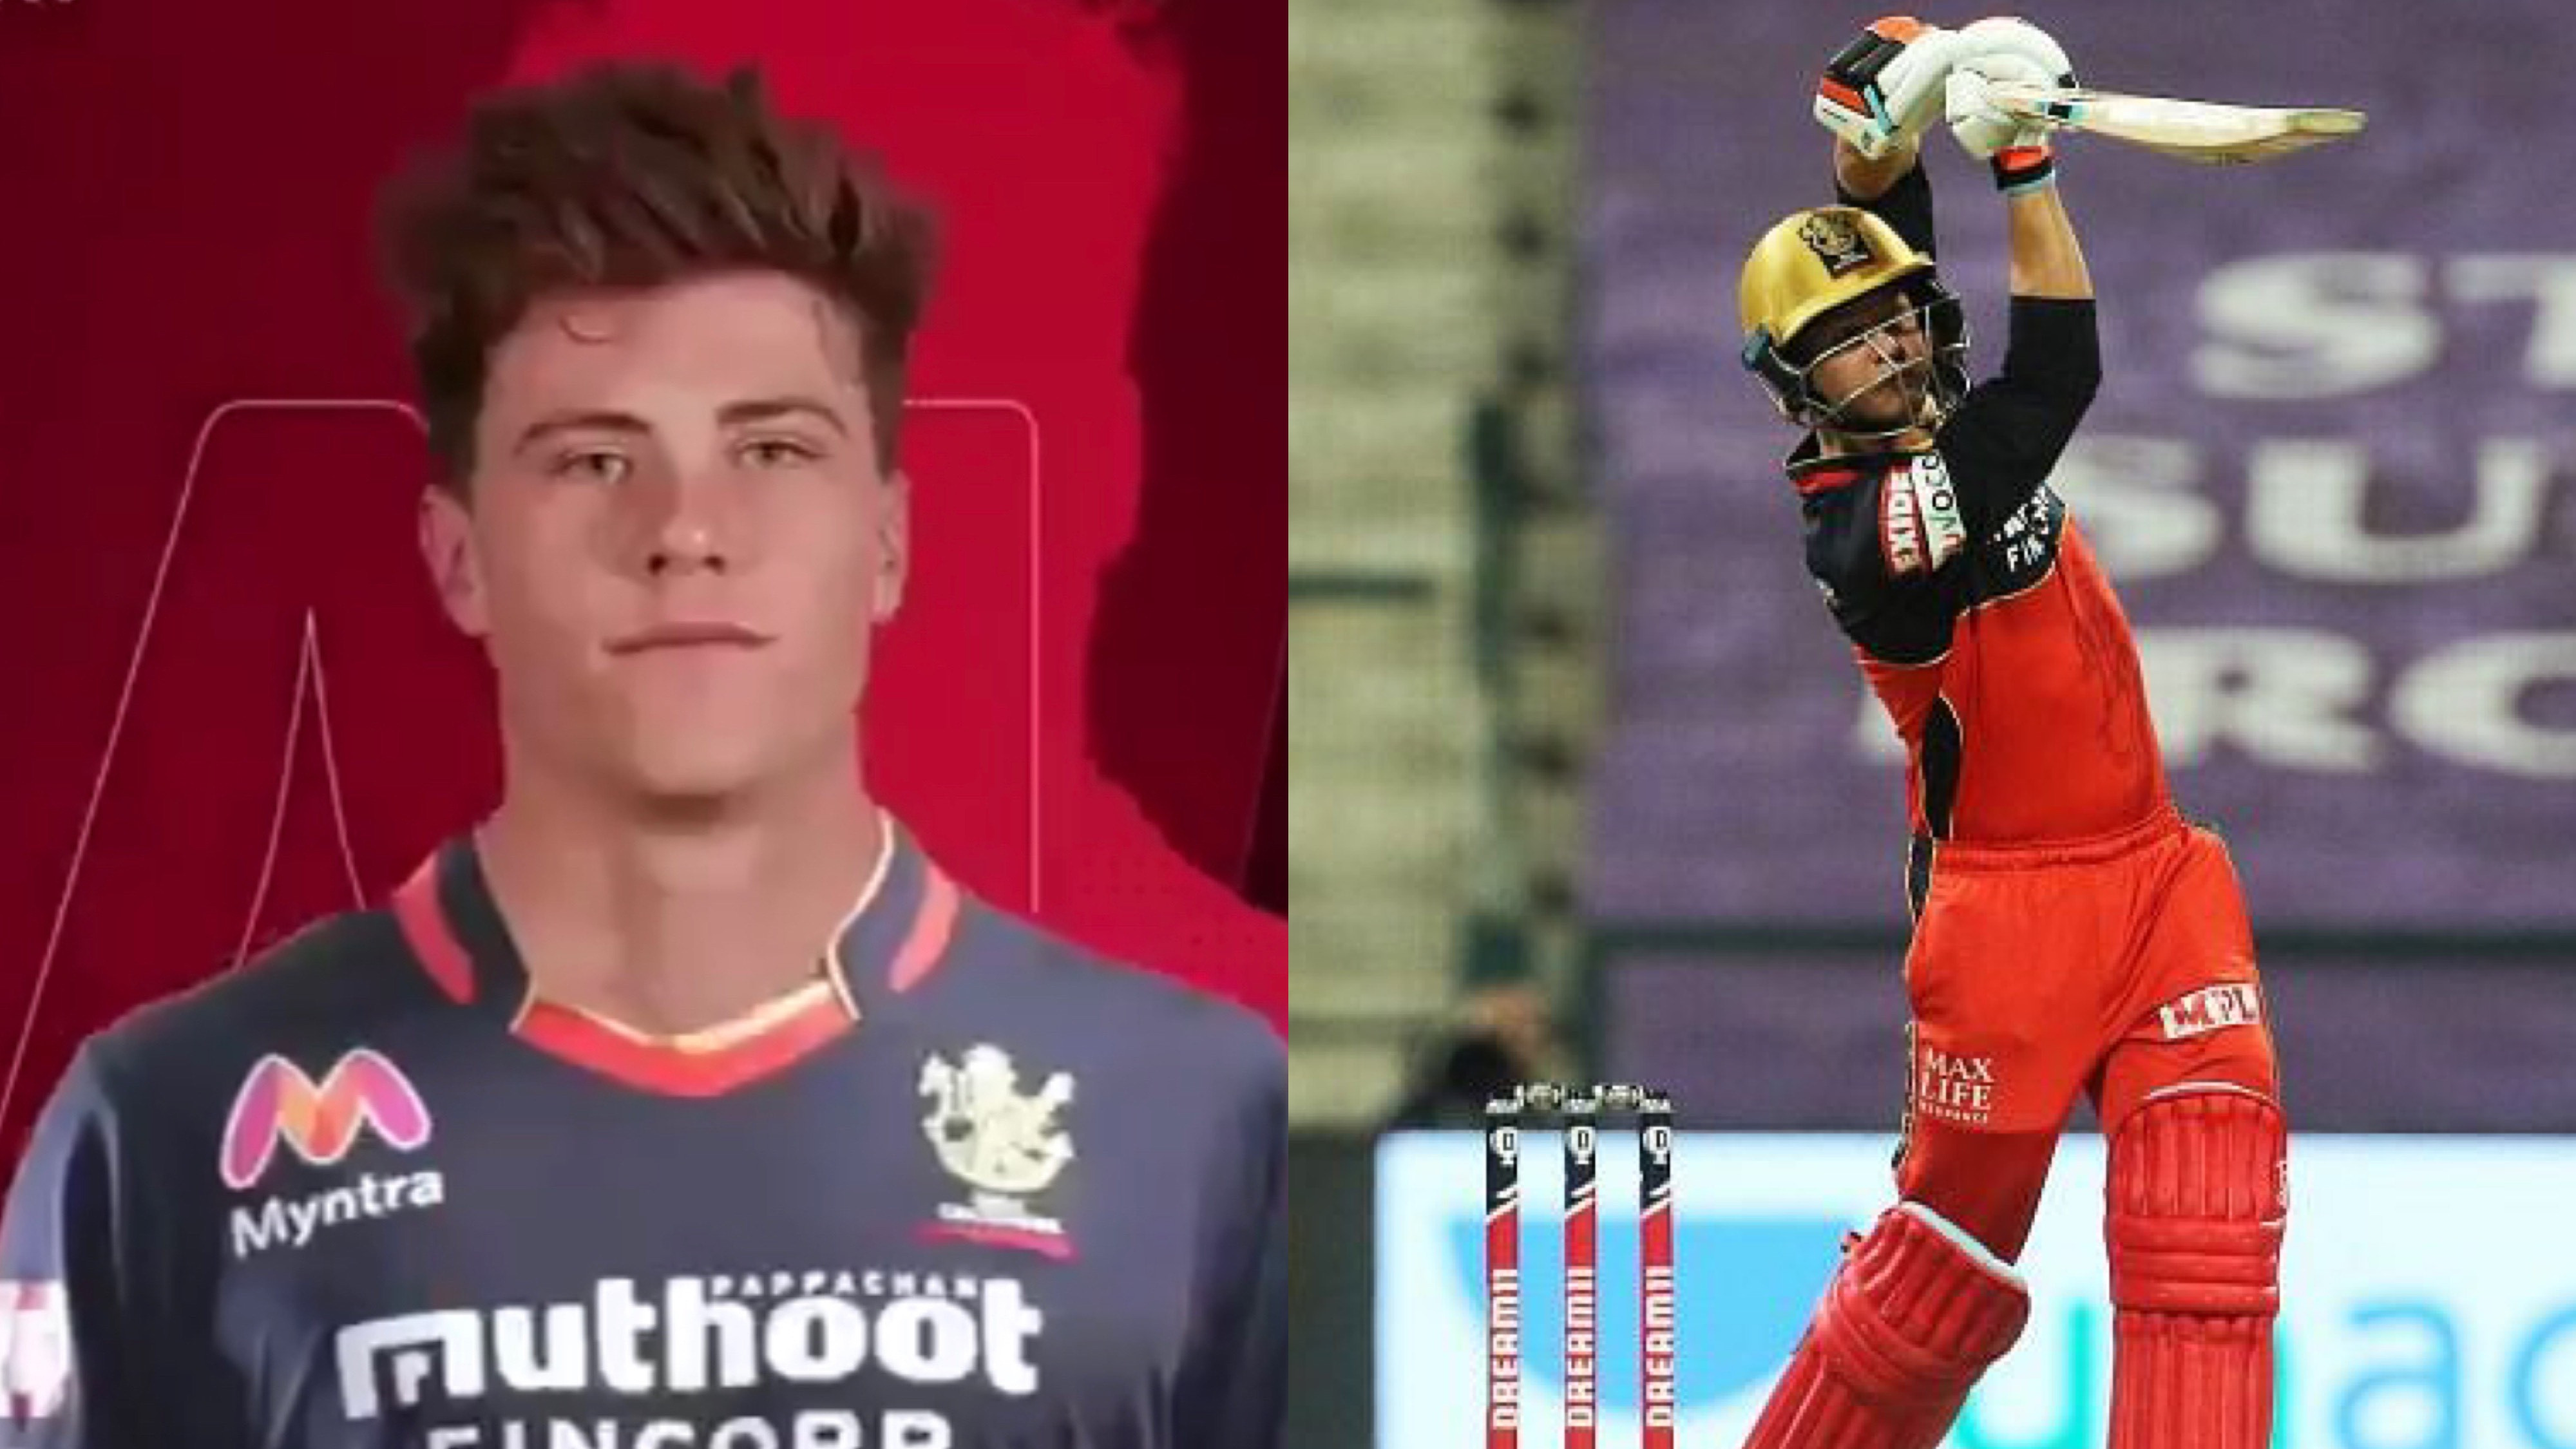 IPL 2021: RCB signs Finn Allen as replacement for Josh Philippe for IPL 14